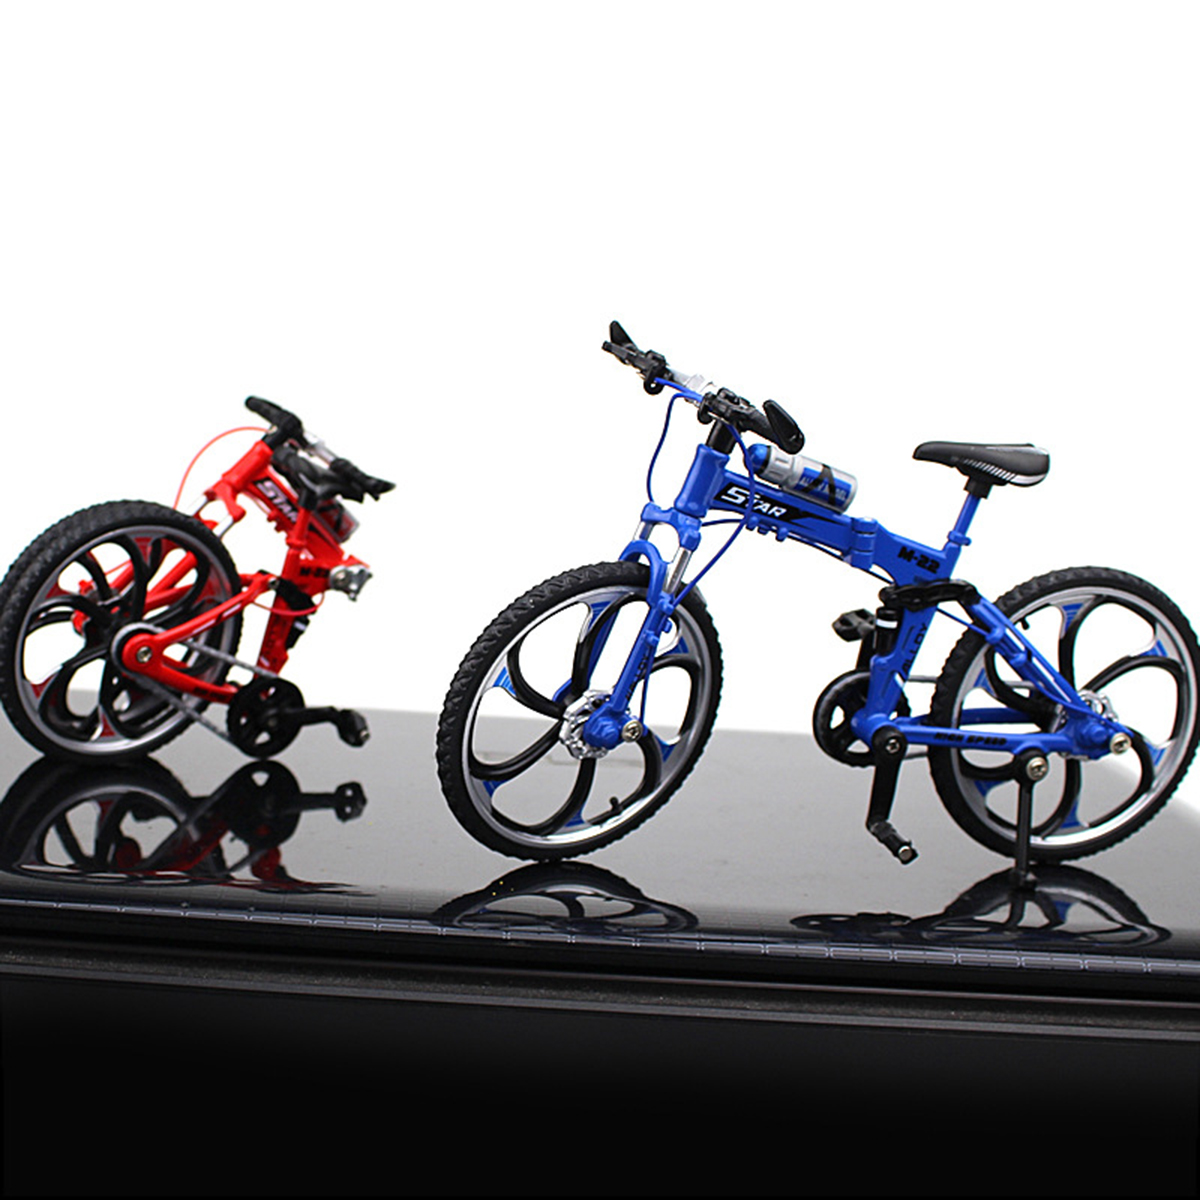 110-3D-Mini-Multi-color-Alloy-Mountain-Racing-Bicycle-Rotatable-Wheel-Diecast-Model-Toy-for-Decorati-1704789-10